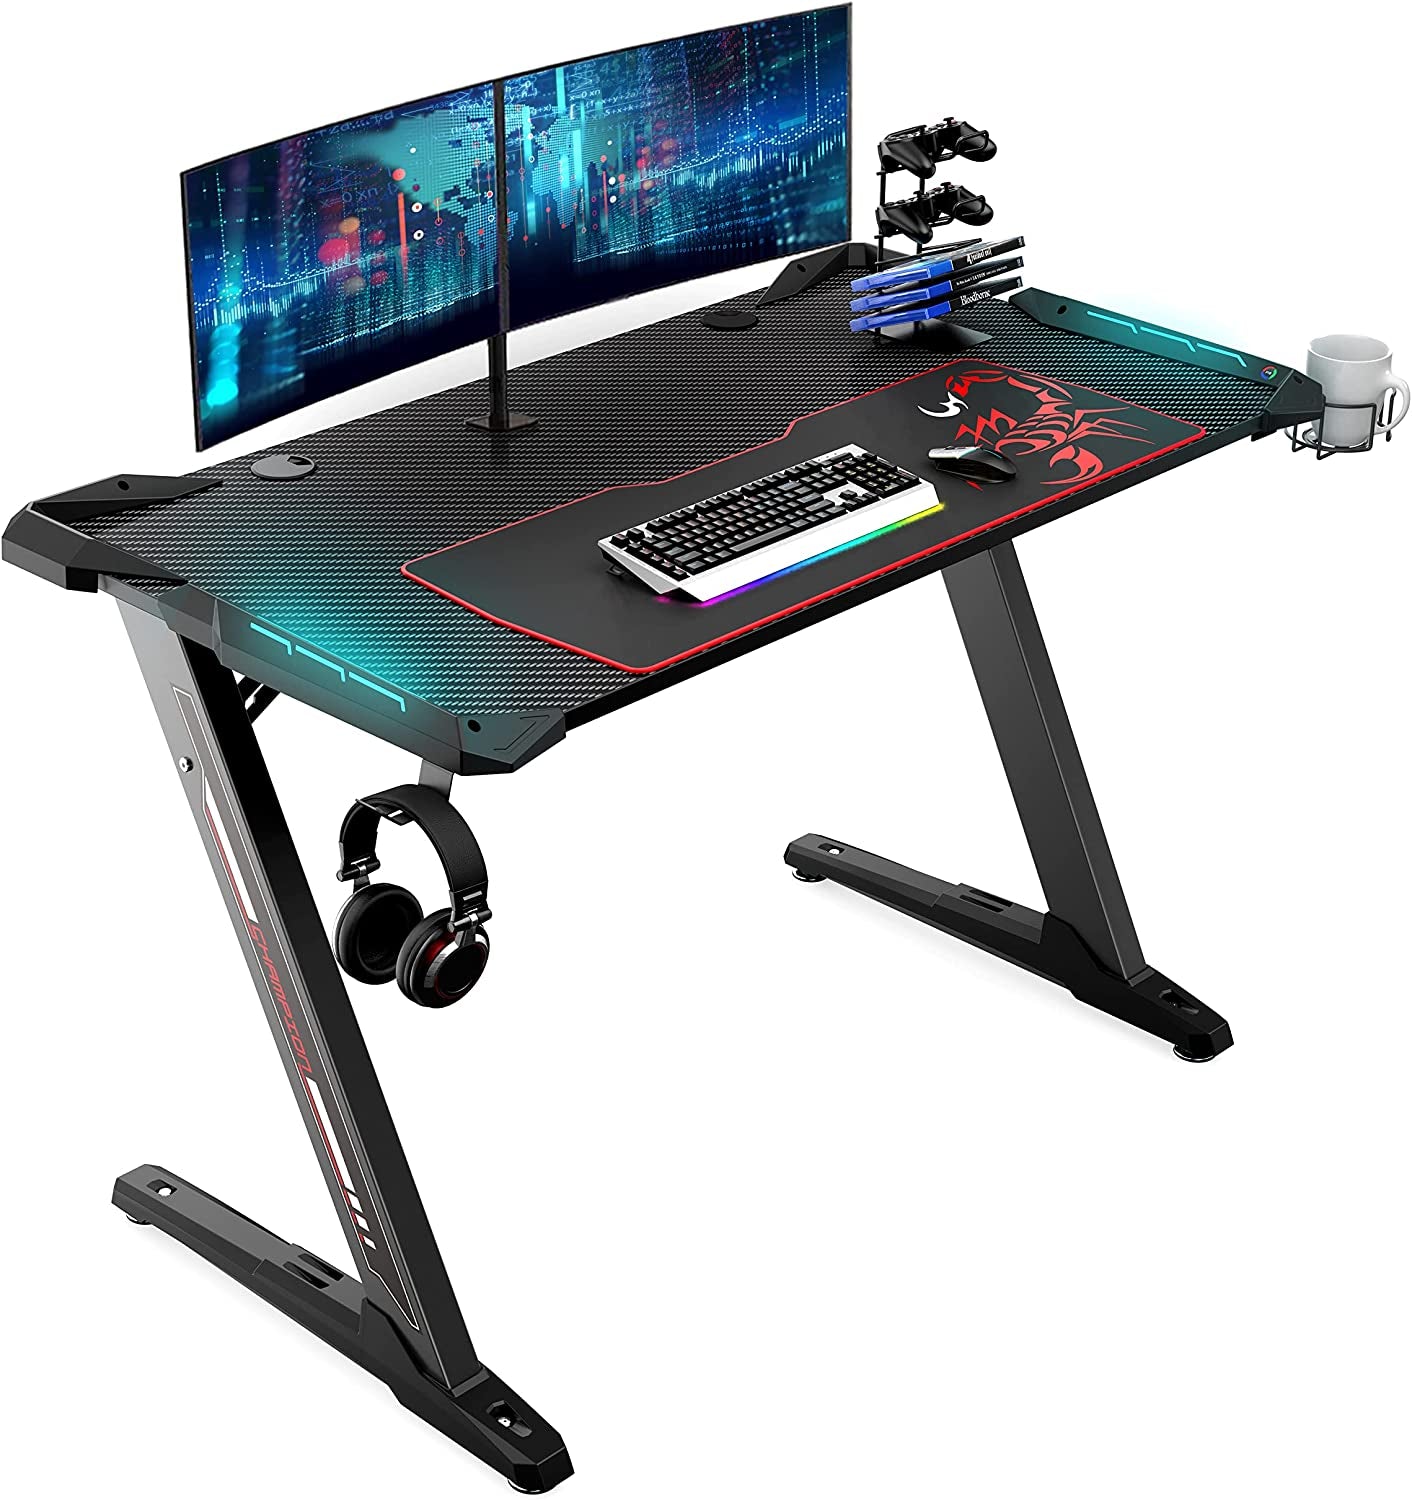 Professional Gaming Desk, 44.5" Z Shaped Home Office PC Computer Desk with LED Lights, Controller Stand, Cup Holder, Headphone, Hook Free Mousepad  